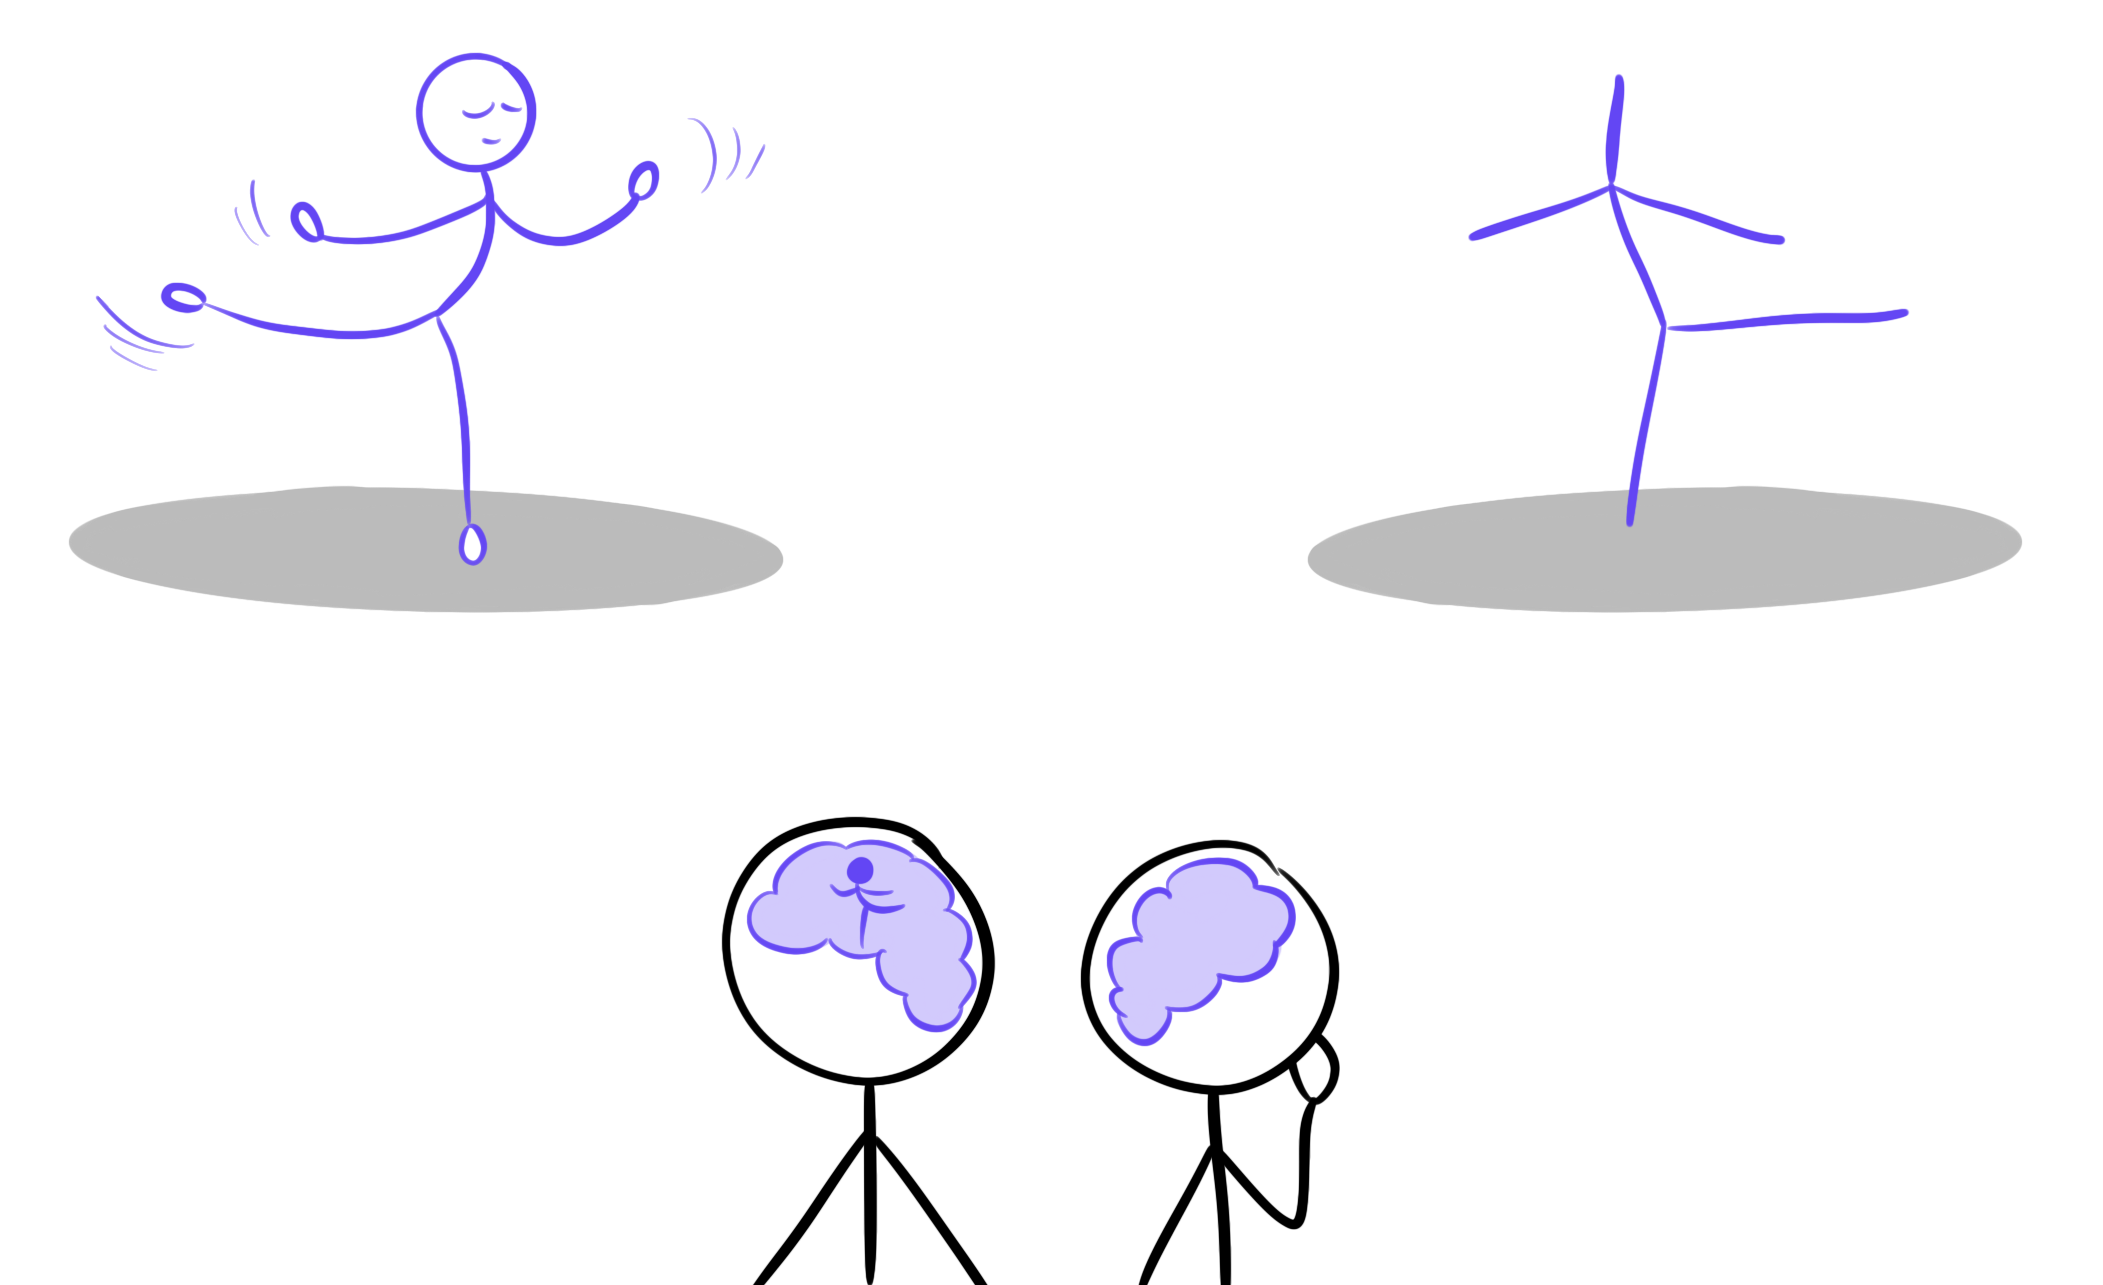 On the left, a dancer looks at a human body dancing and a reflection of this dance is displayed in the brain. On the right, the dancer looks at a dancing stick figure but this time there is not reflection in the brain.